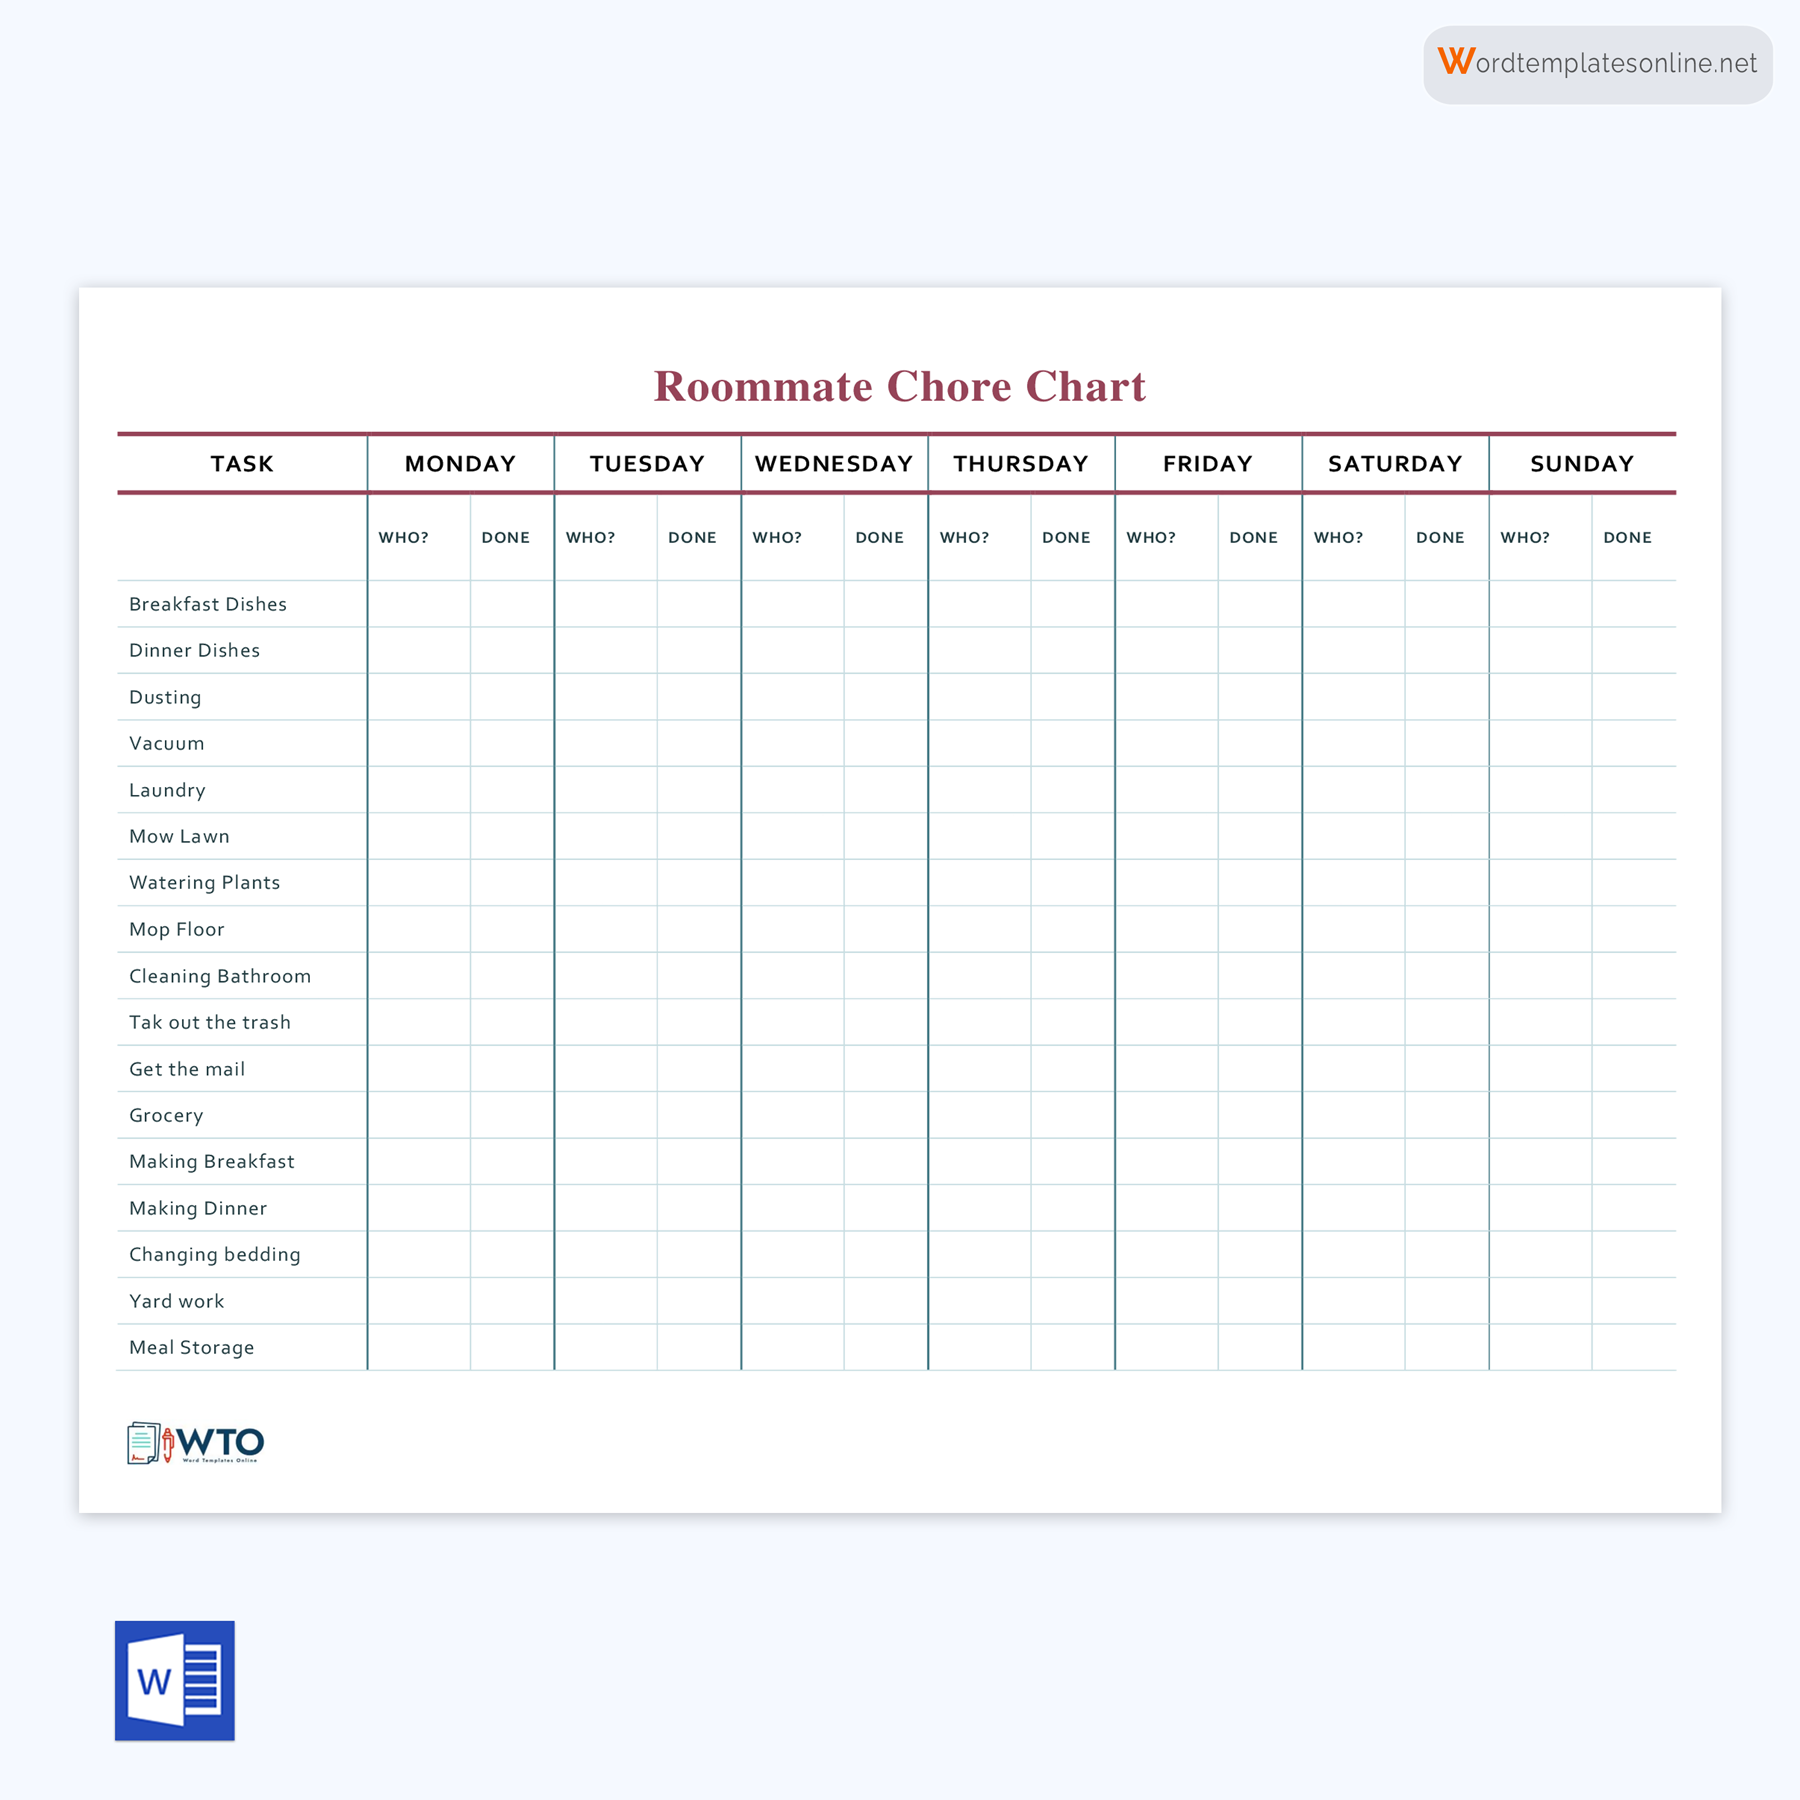 Customizable Roommate Chore Chart Template - Smooth Living